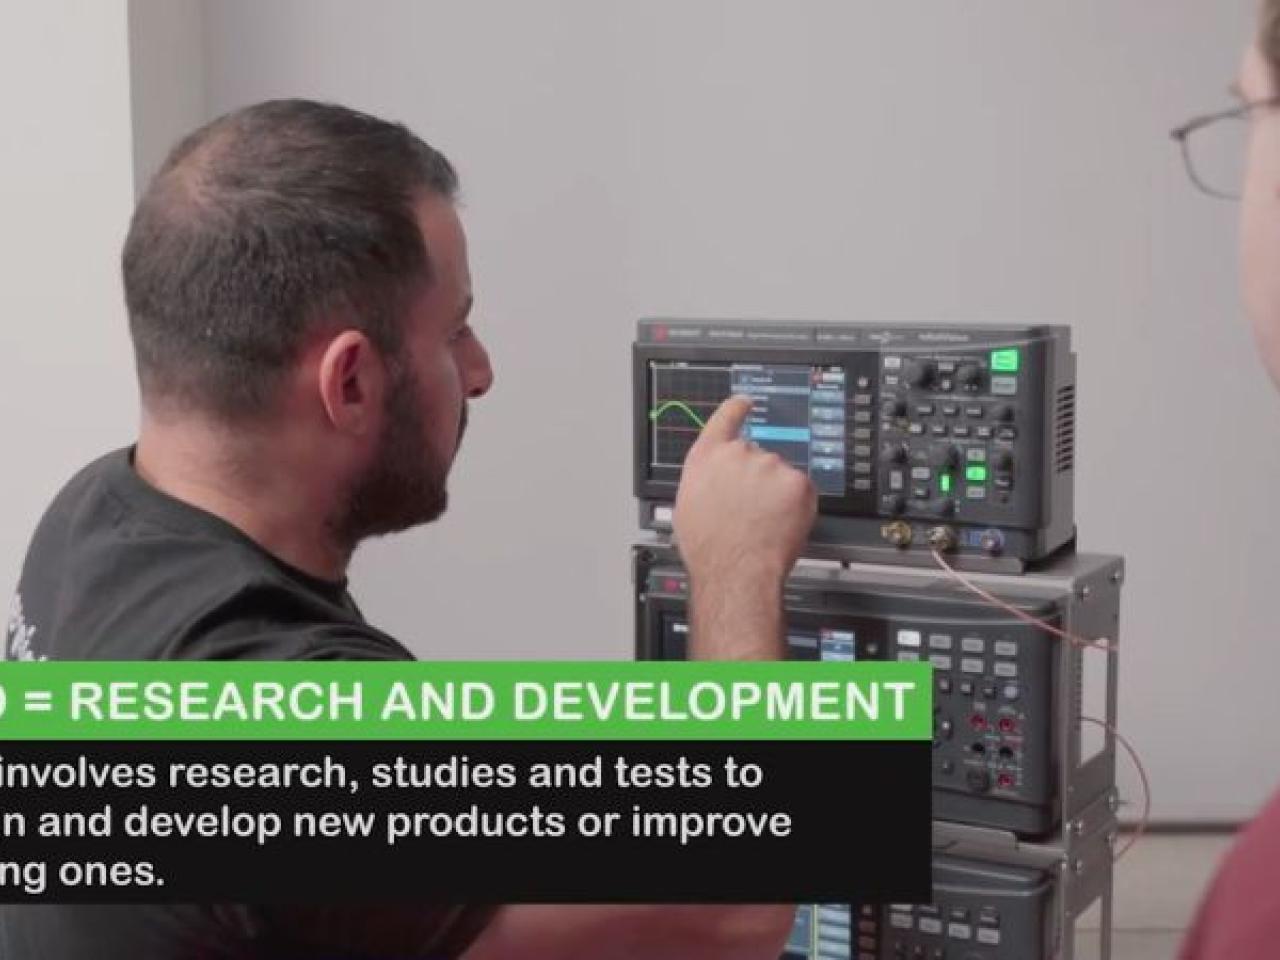 Two people looking at electronics, with text overlay reading: R & D = Research and Development. R & D involves research, studies and tests to design and develop new products or improve existing ones.